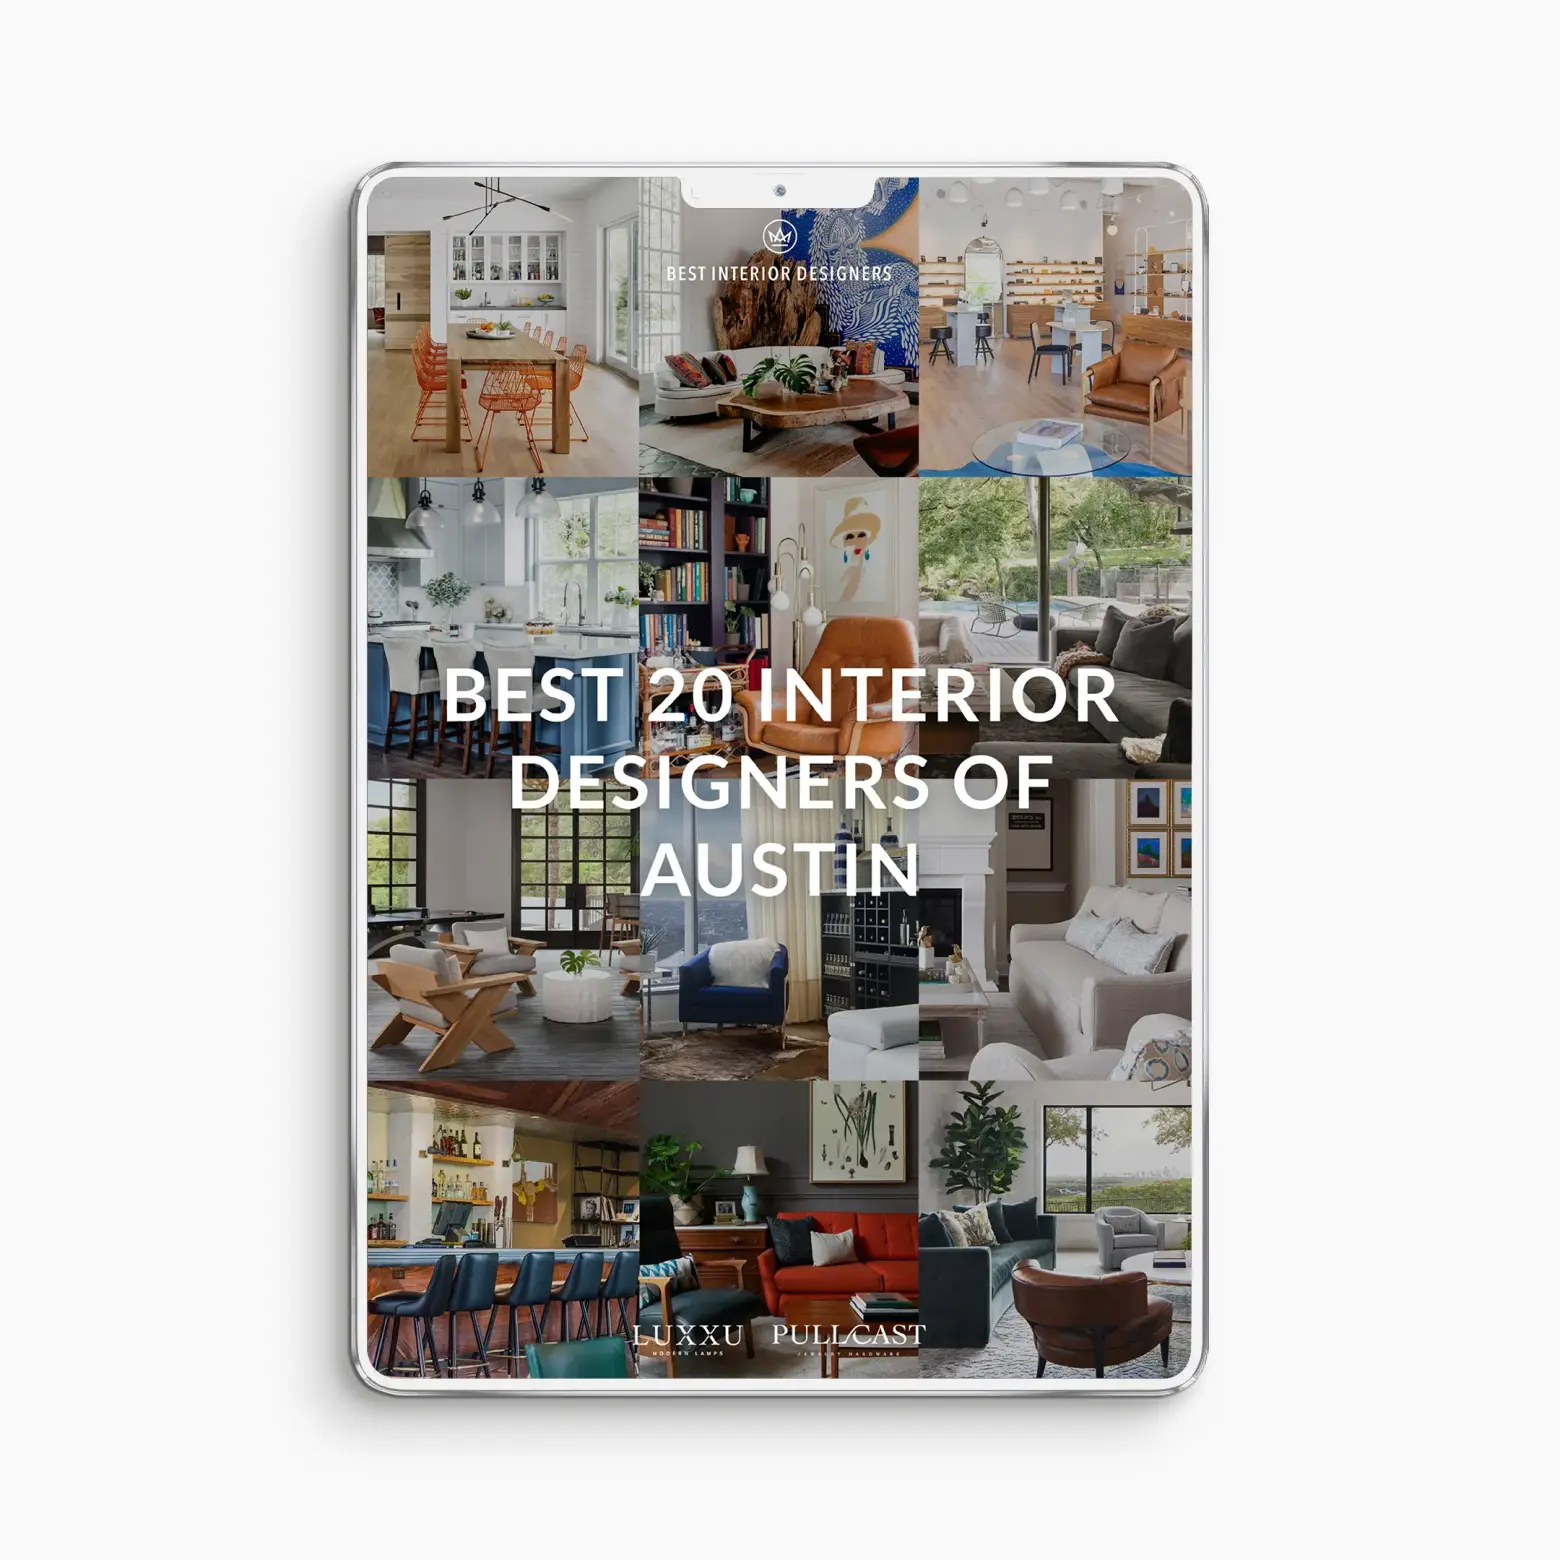 Free Ebooks Download: The Best Interior Designers with PullCast